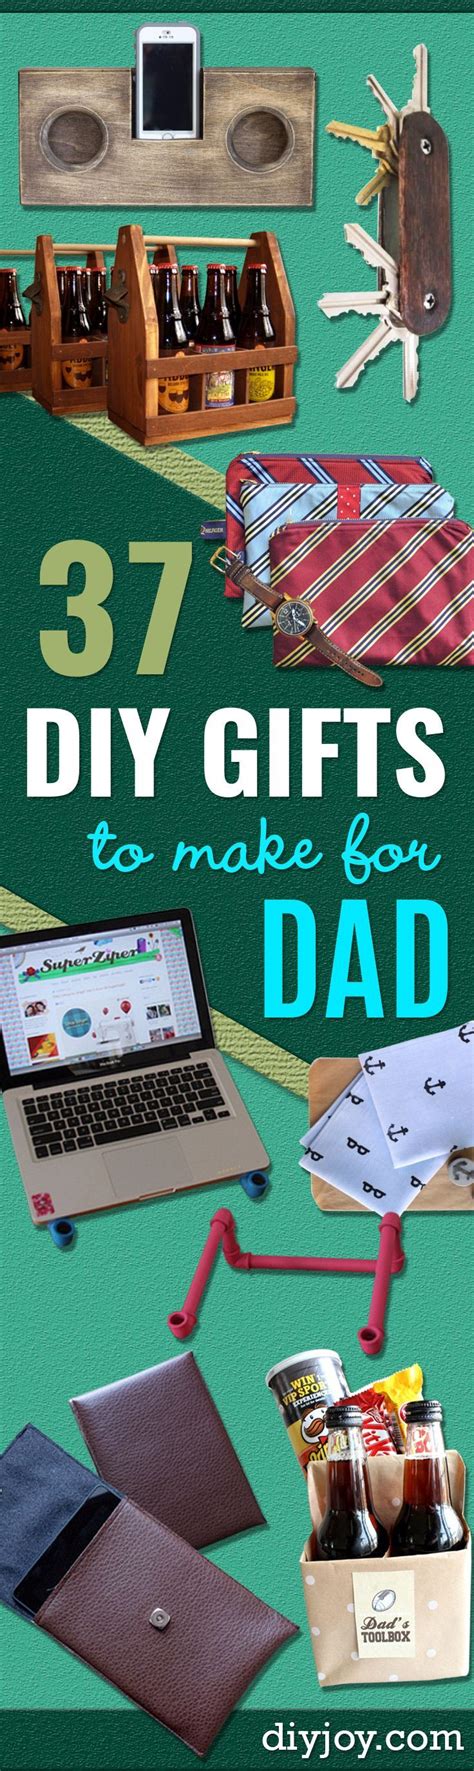 What birthday gift should i buy for my dad? 37 DIY Gifts to Make for Dad | Diy gifts to make, Diy ...